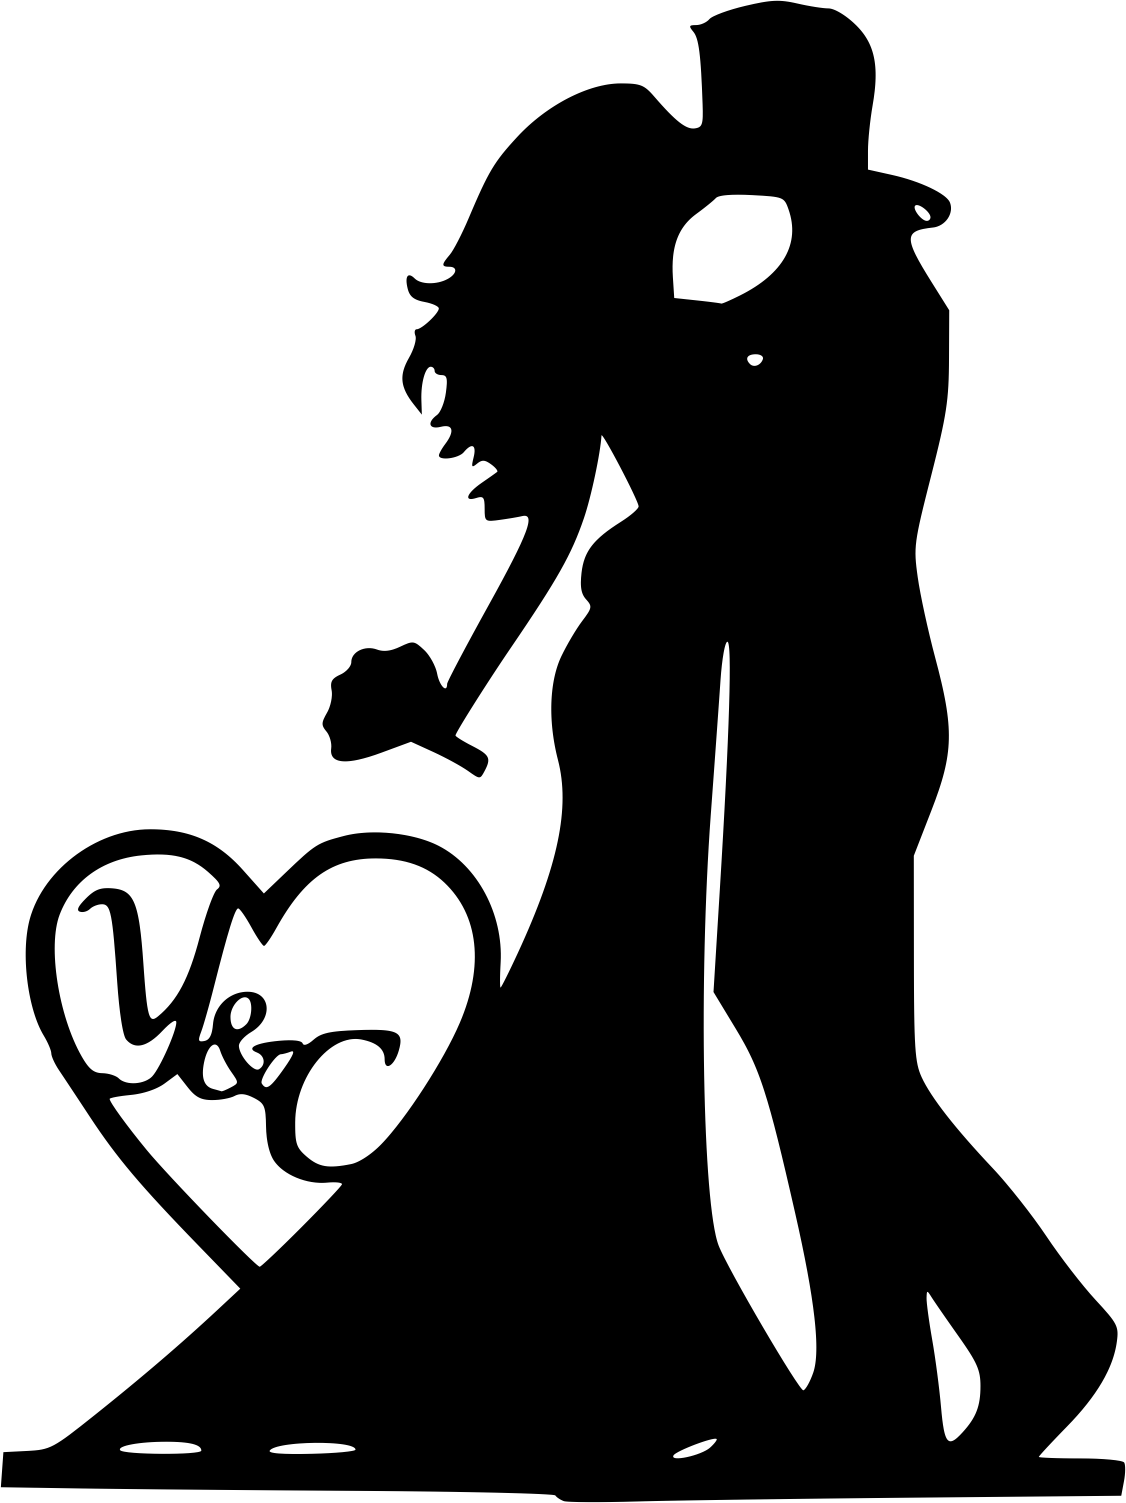 Mr and Mrs Silhouette Black Bride and Groom Vector Free Vector cdr ...